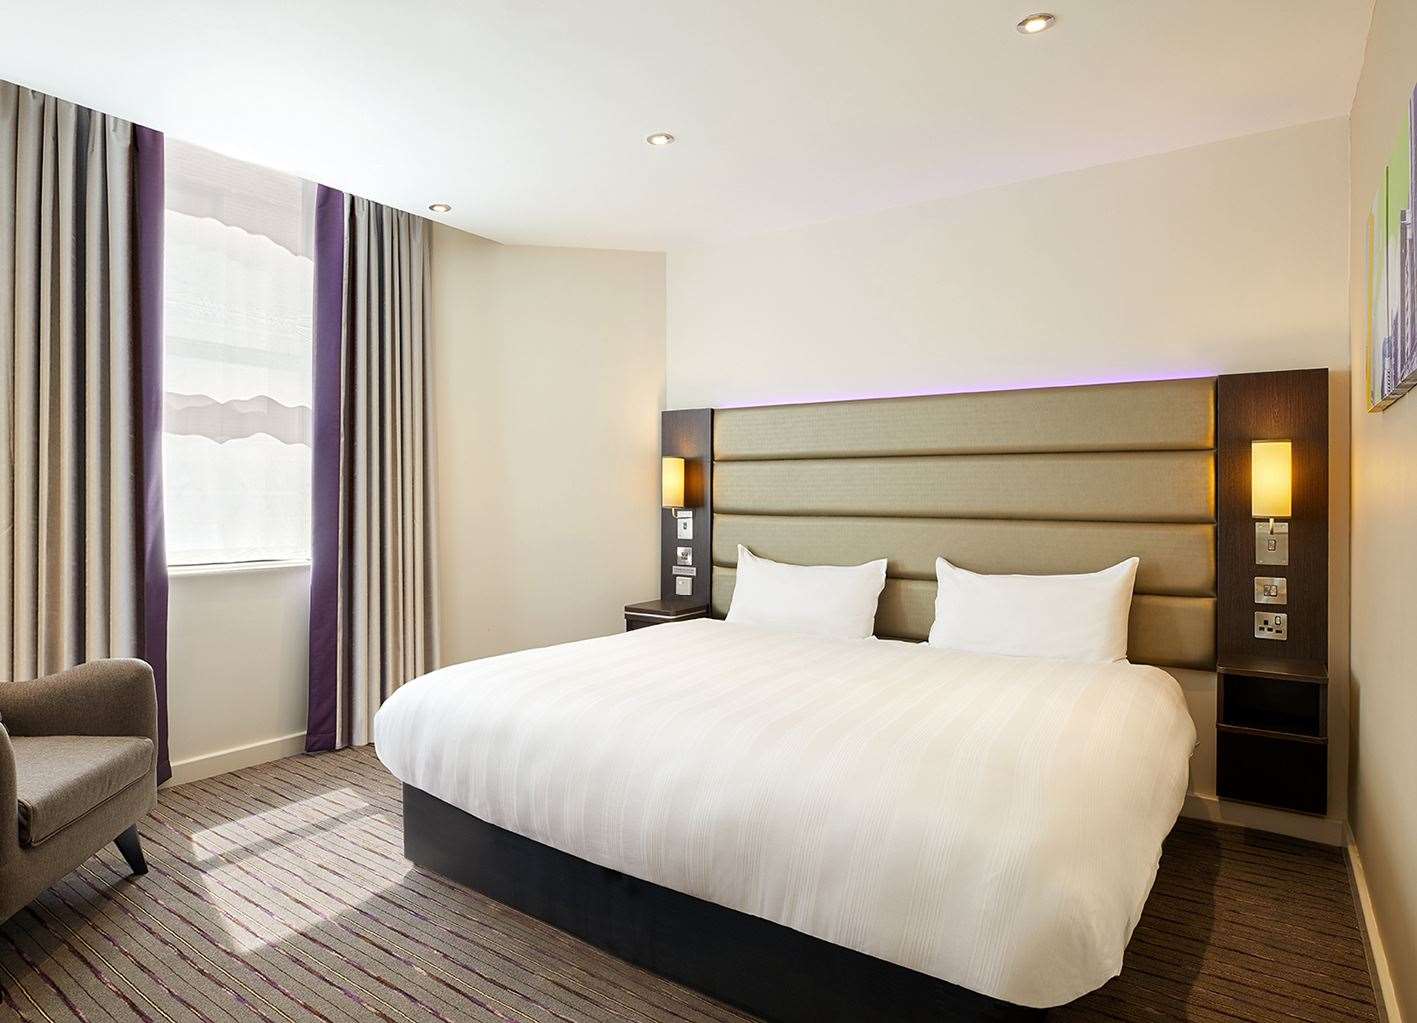 Premier Inn has says it has released millions of £29 hotel rooms. The company is hoping to reopen businesses in May